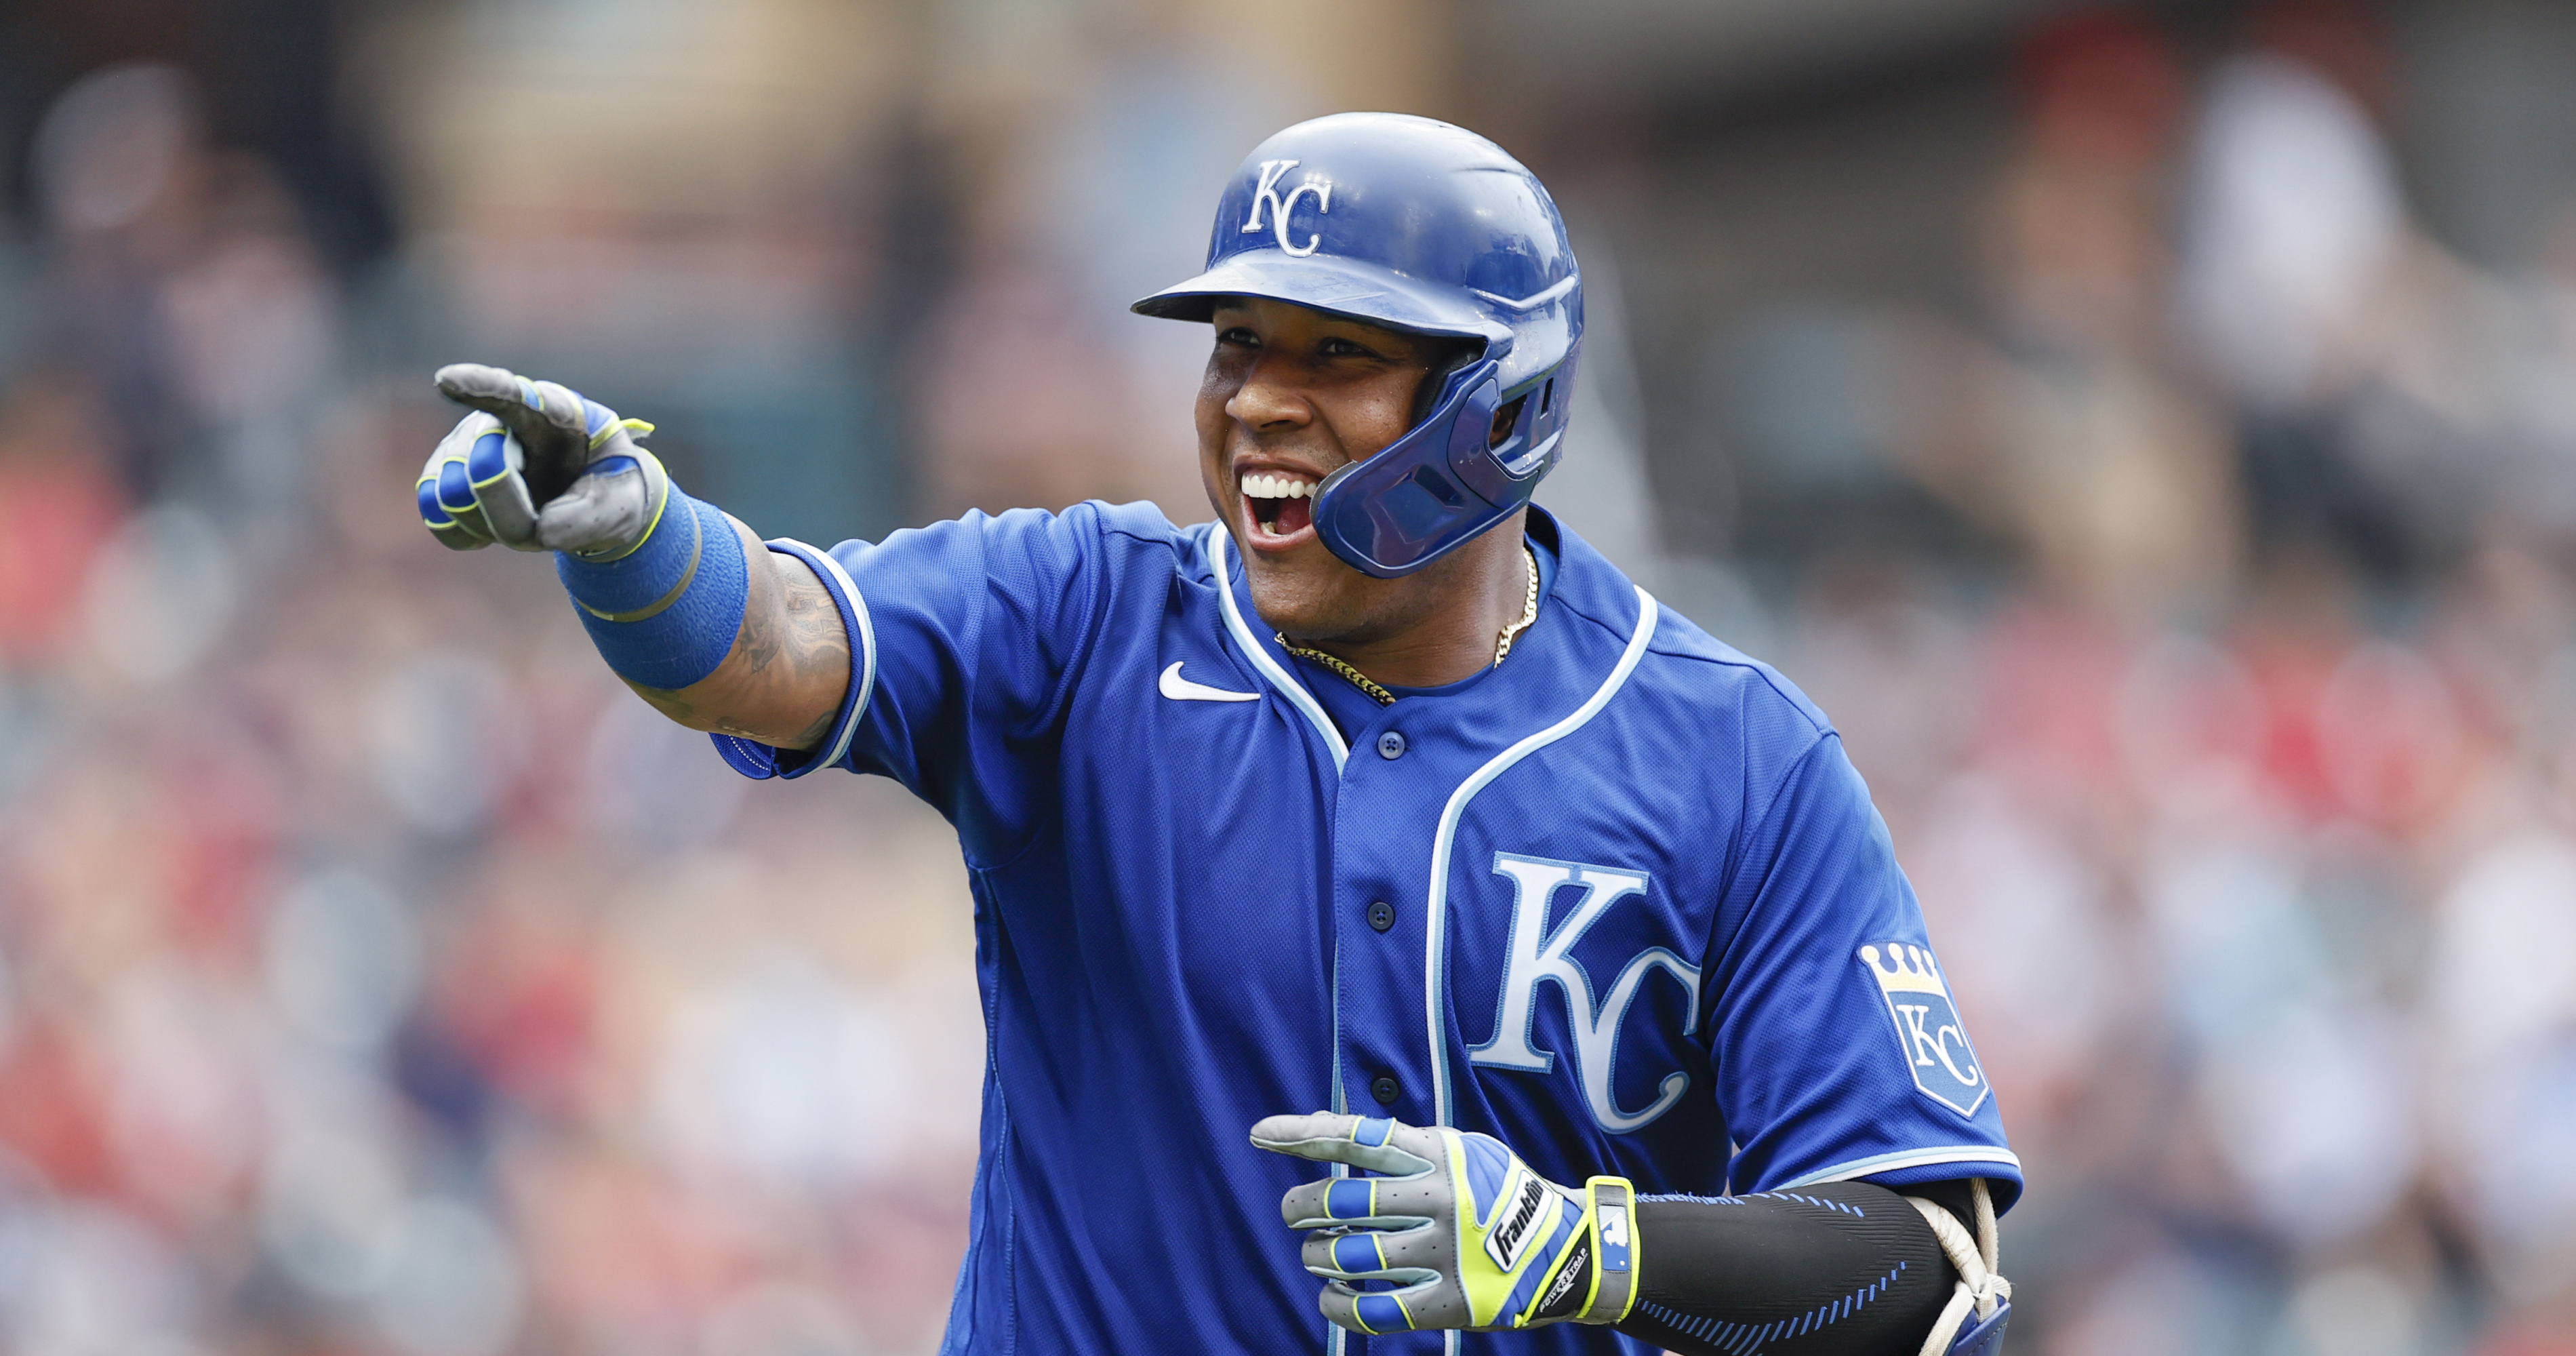 Salvador Perez on X: What a year! Thank you for all of support